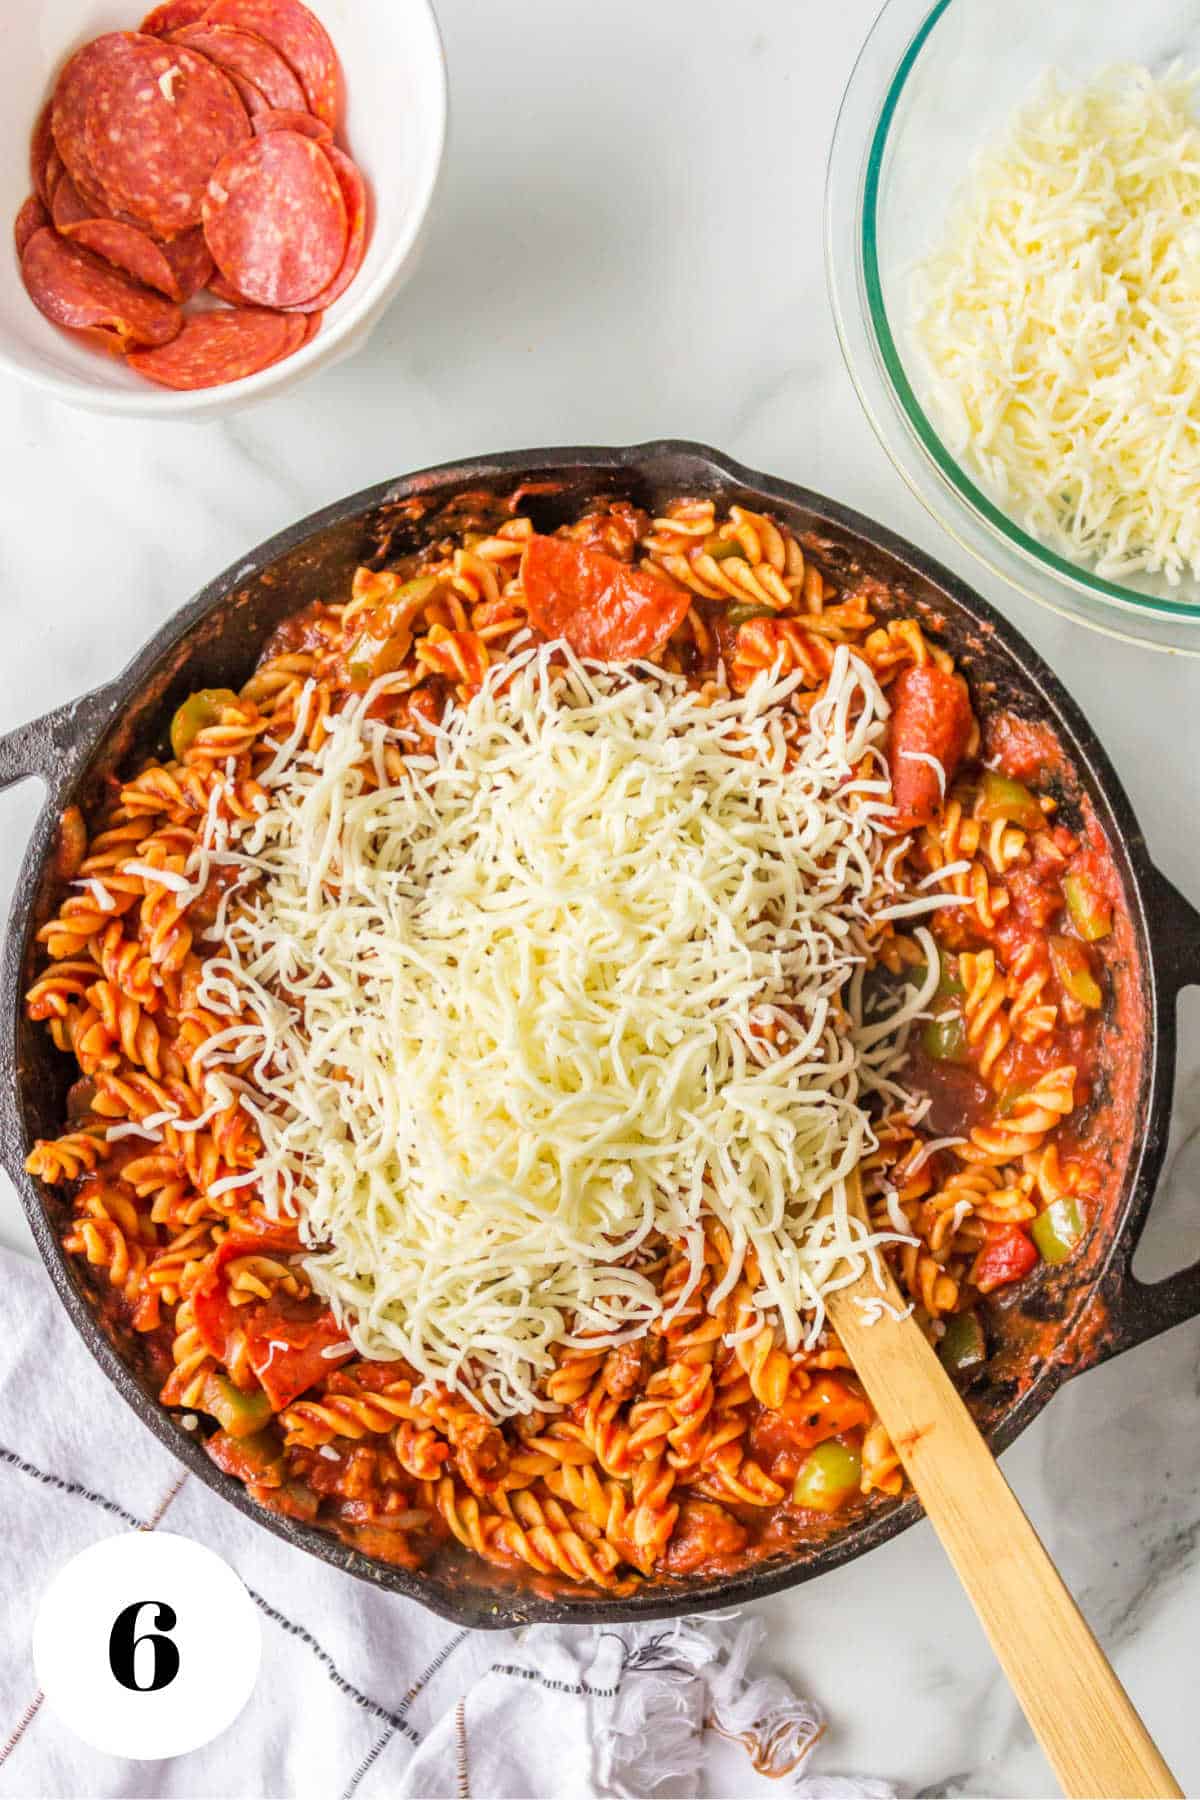 Shredded mozzarella cheese on top of pizza pasta in a skillet. 